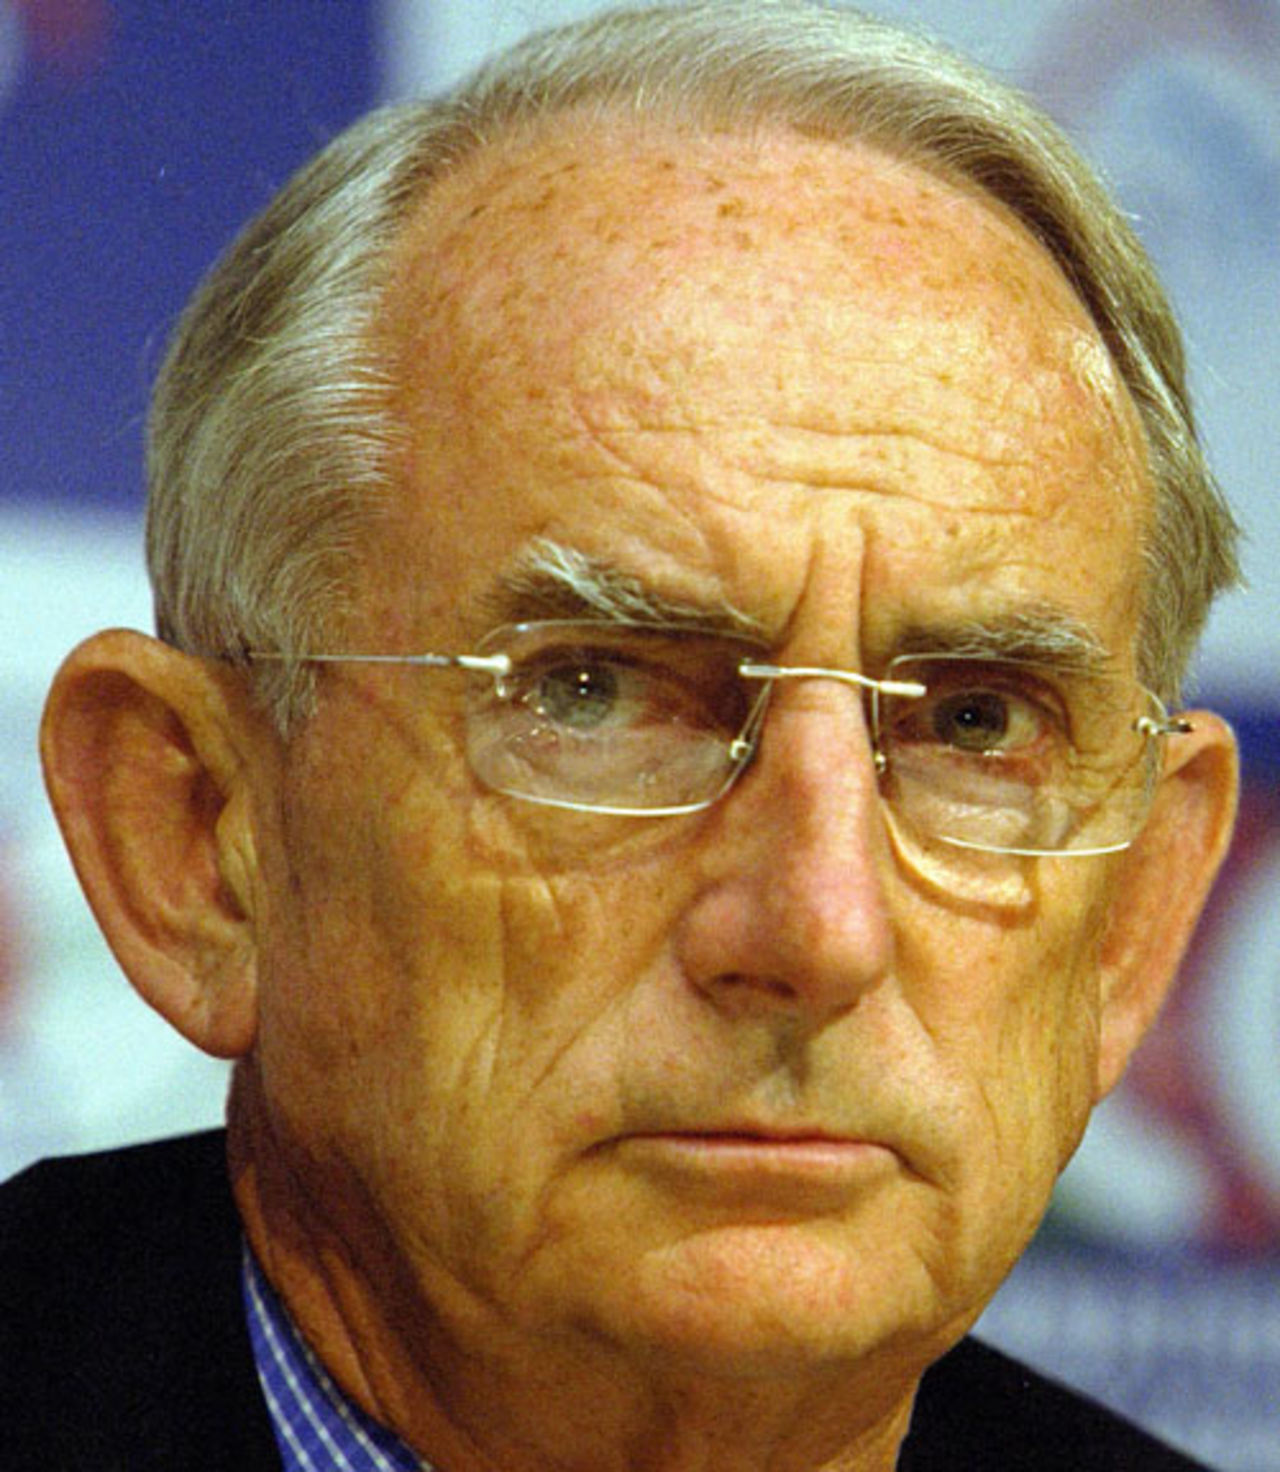 ICC president Malcolm Gray at an ICC press conference, February 2002